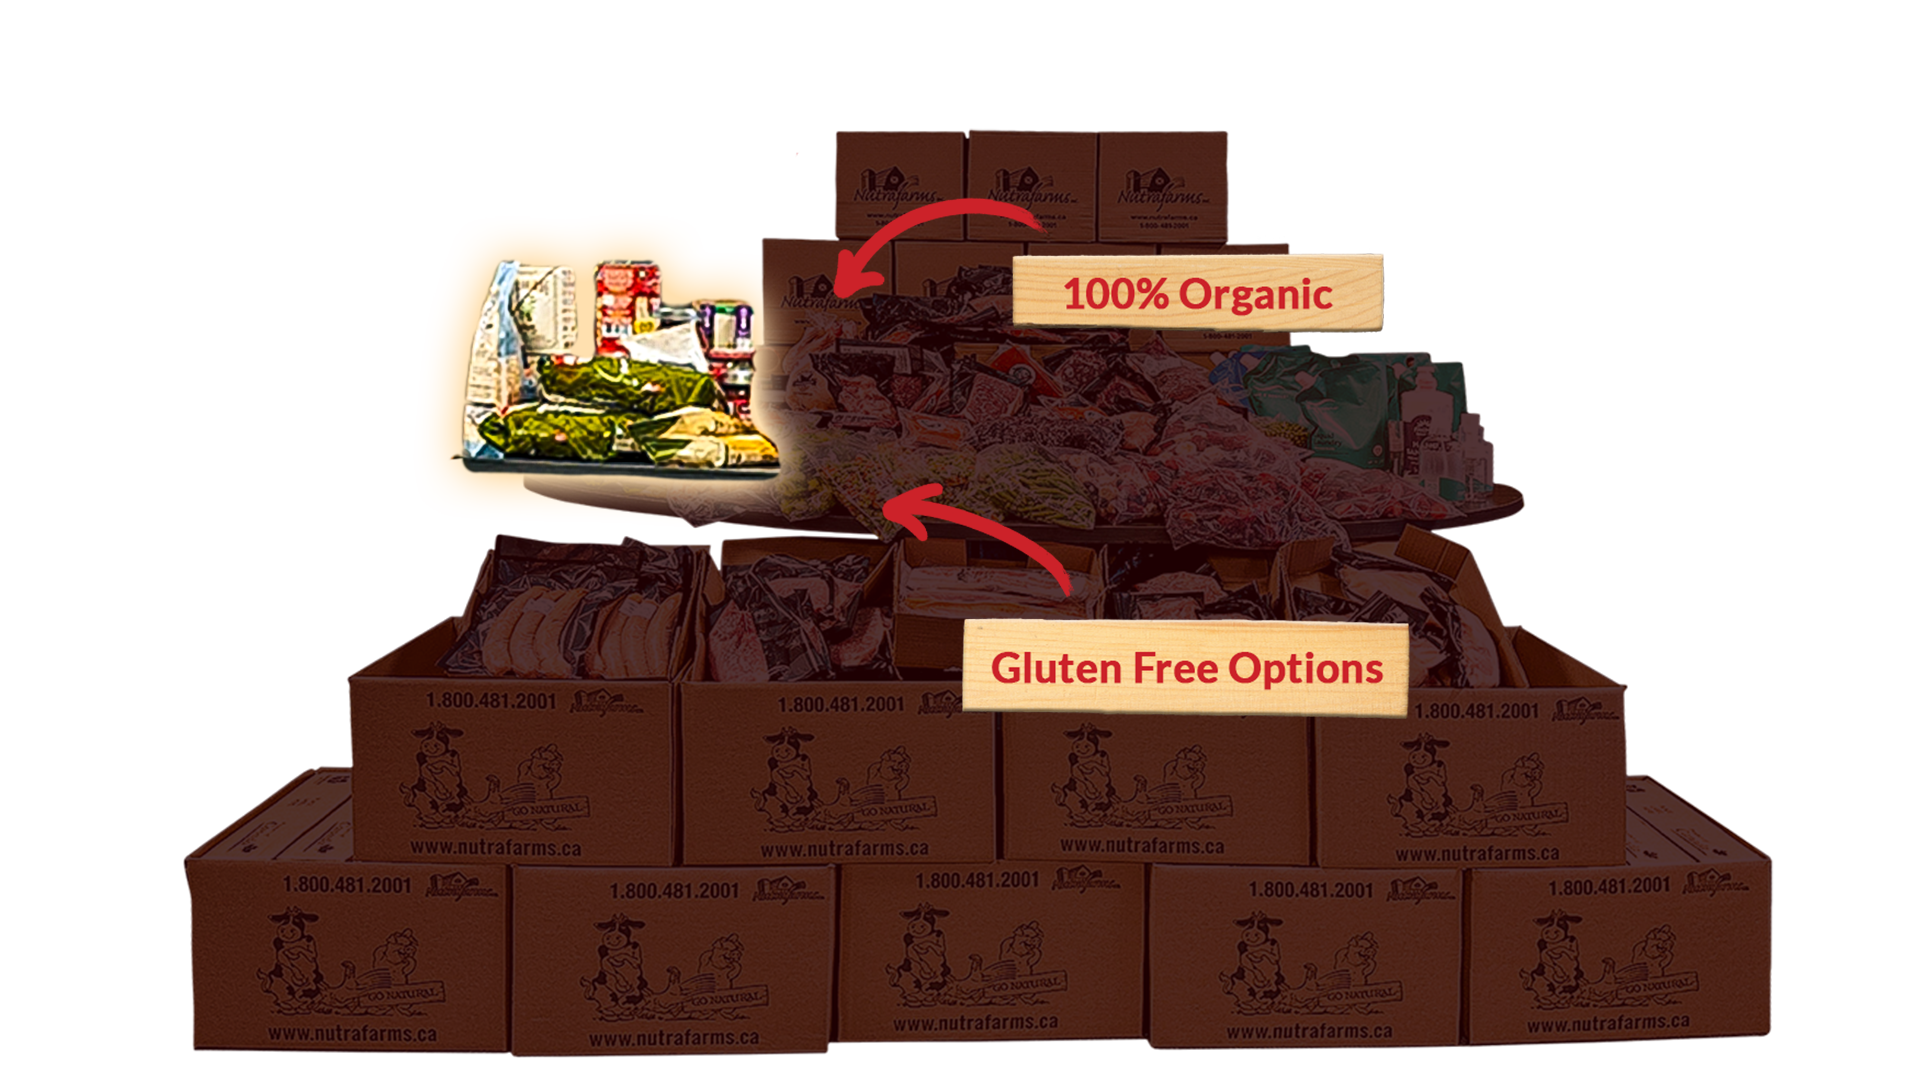 Nutrafarms Affordable Price for Quality Farm Products - Nutrafarms Pricing - Pantry Items